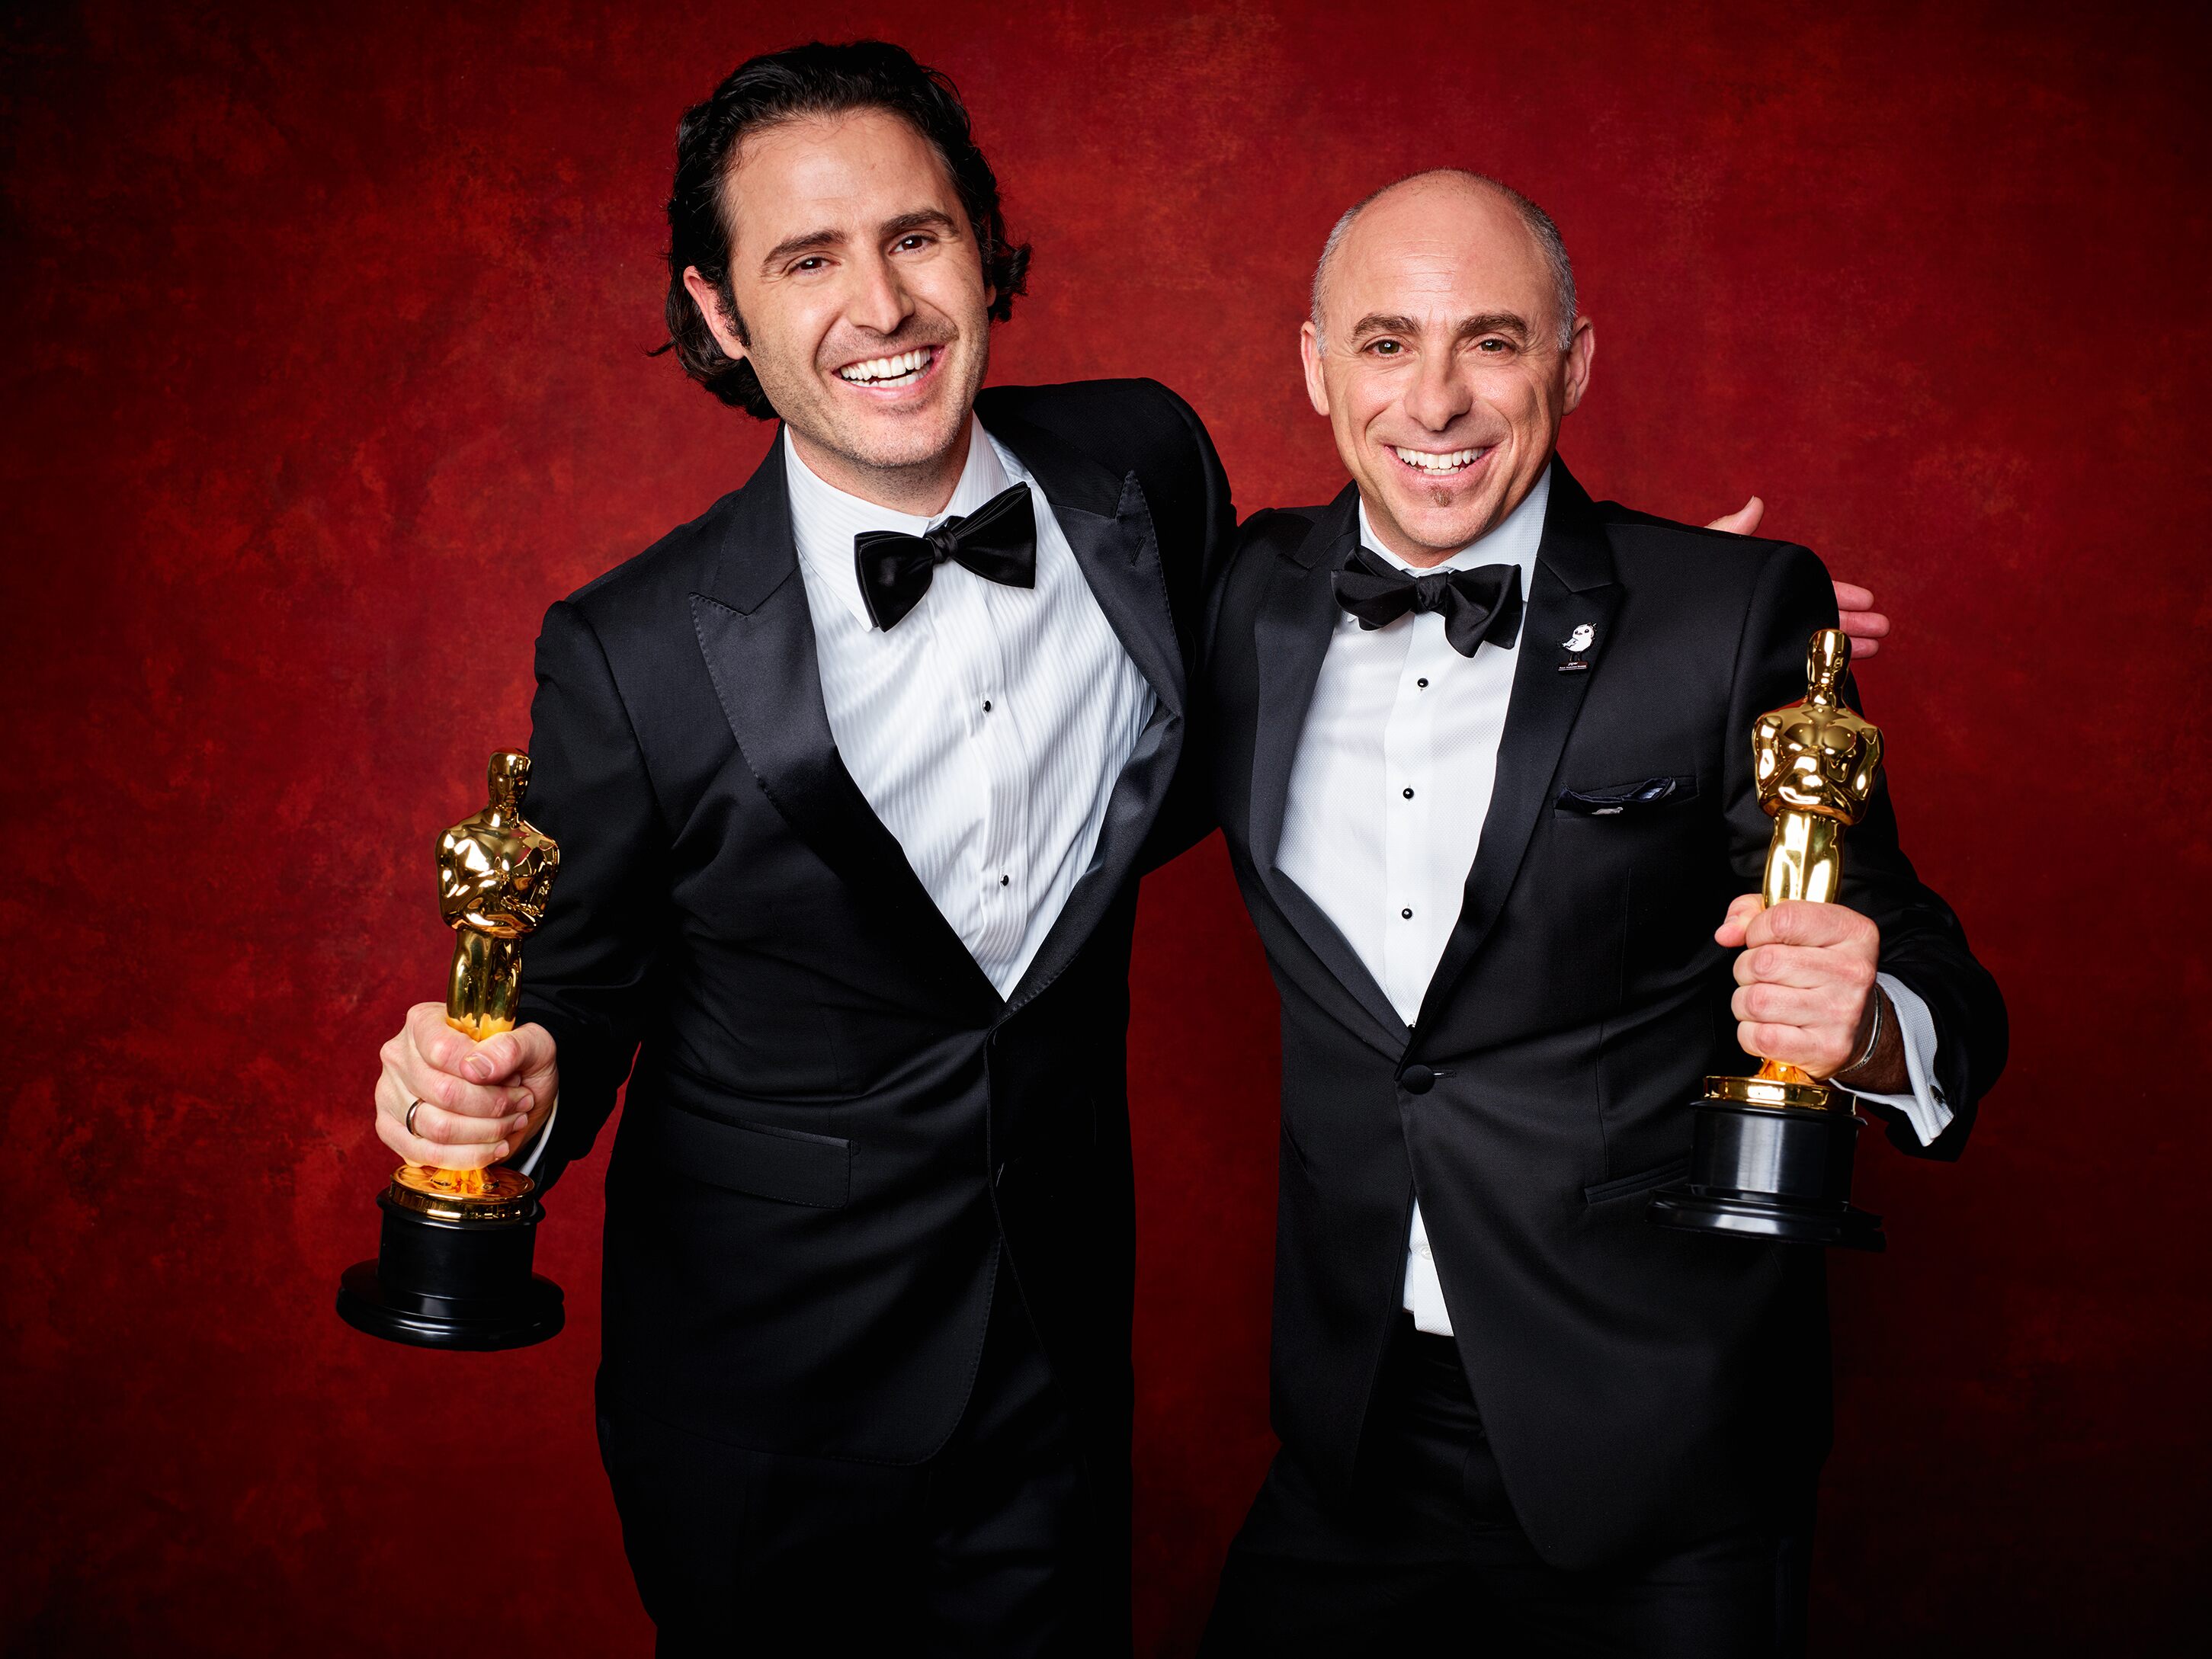 89th Oscar Winner Portraits | Oscars.org | Academy of Motion Picture Arts and Sciences